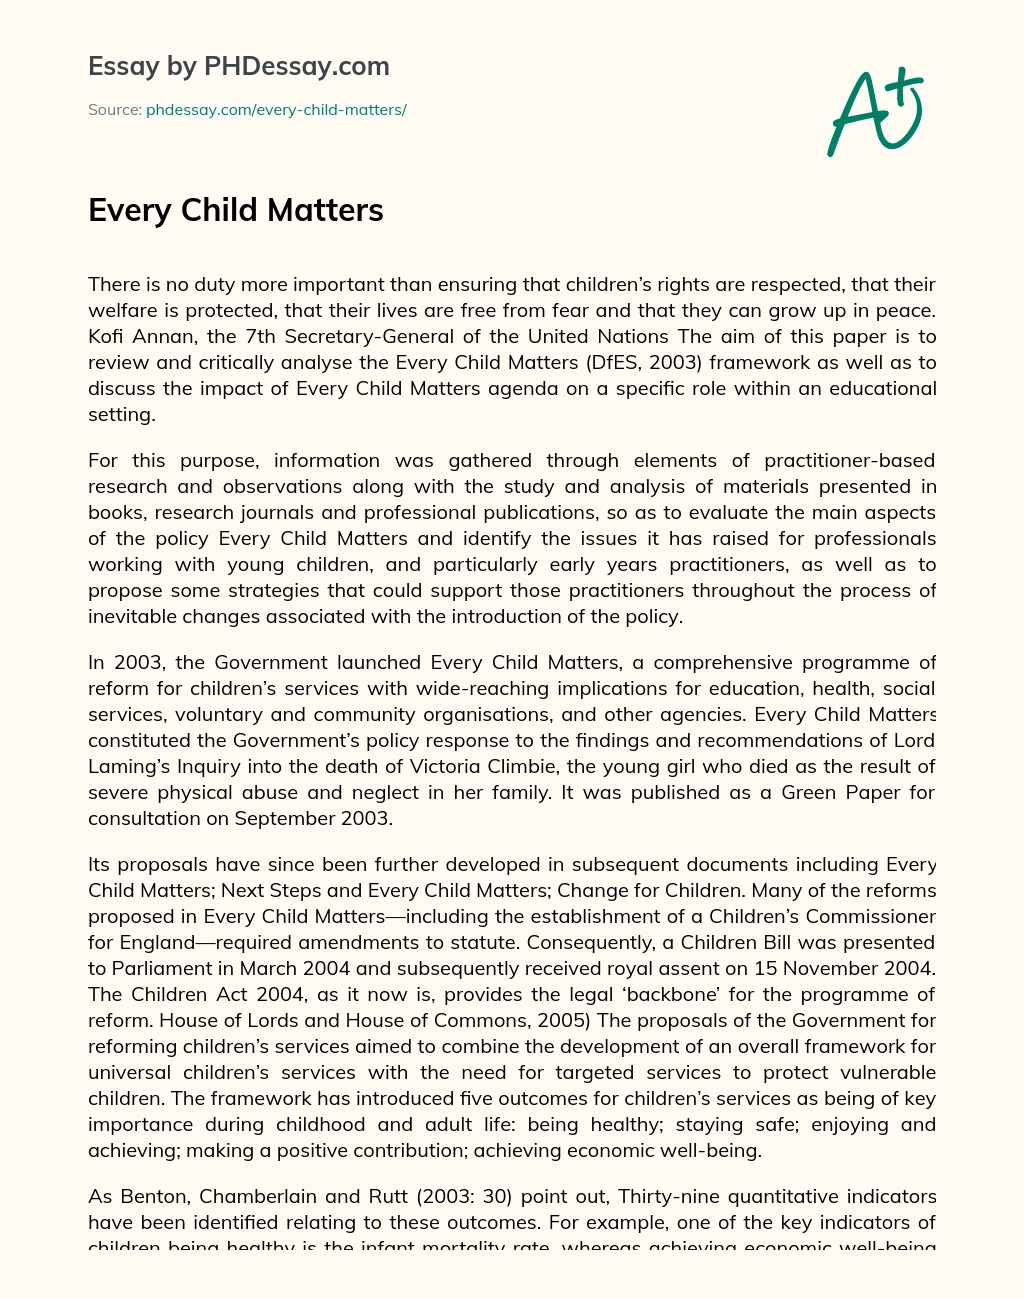 Every Child Matters essay